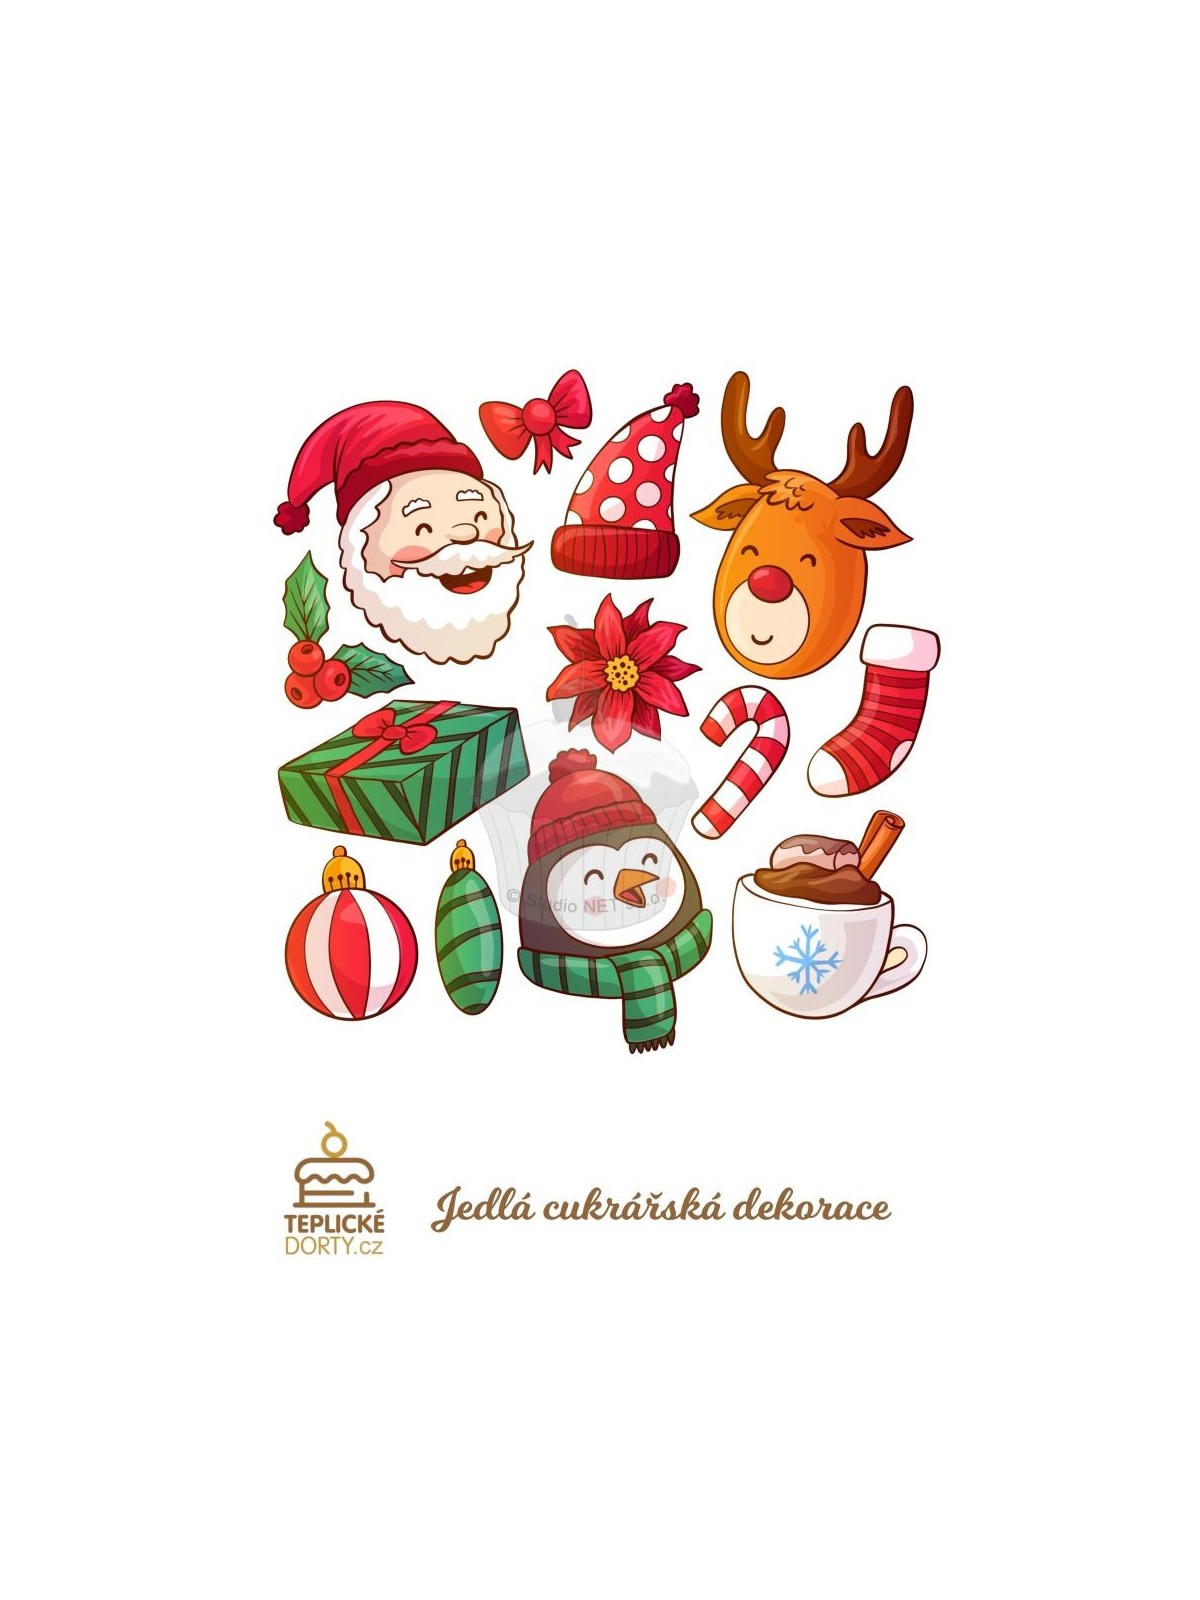 Chocolate Transfer Sheet (Christmas | Santa) Edible for Decorations A4 Size